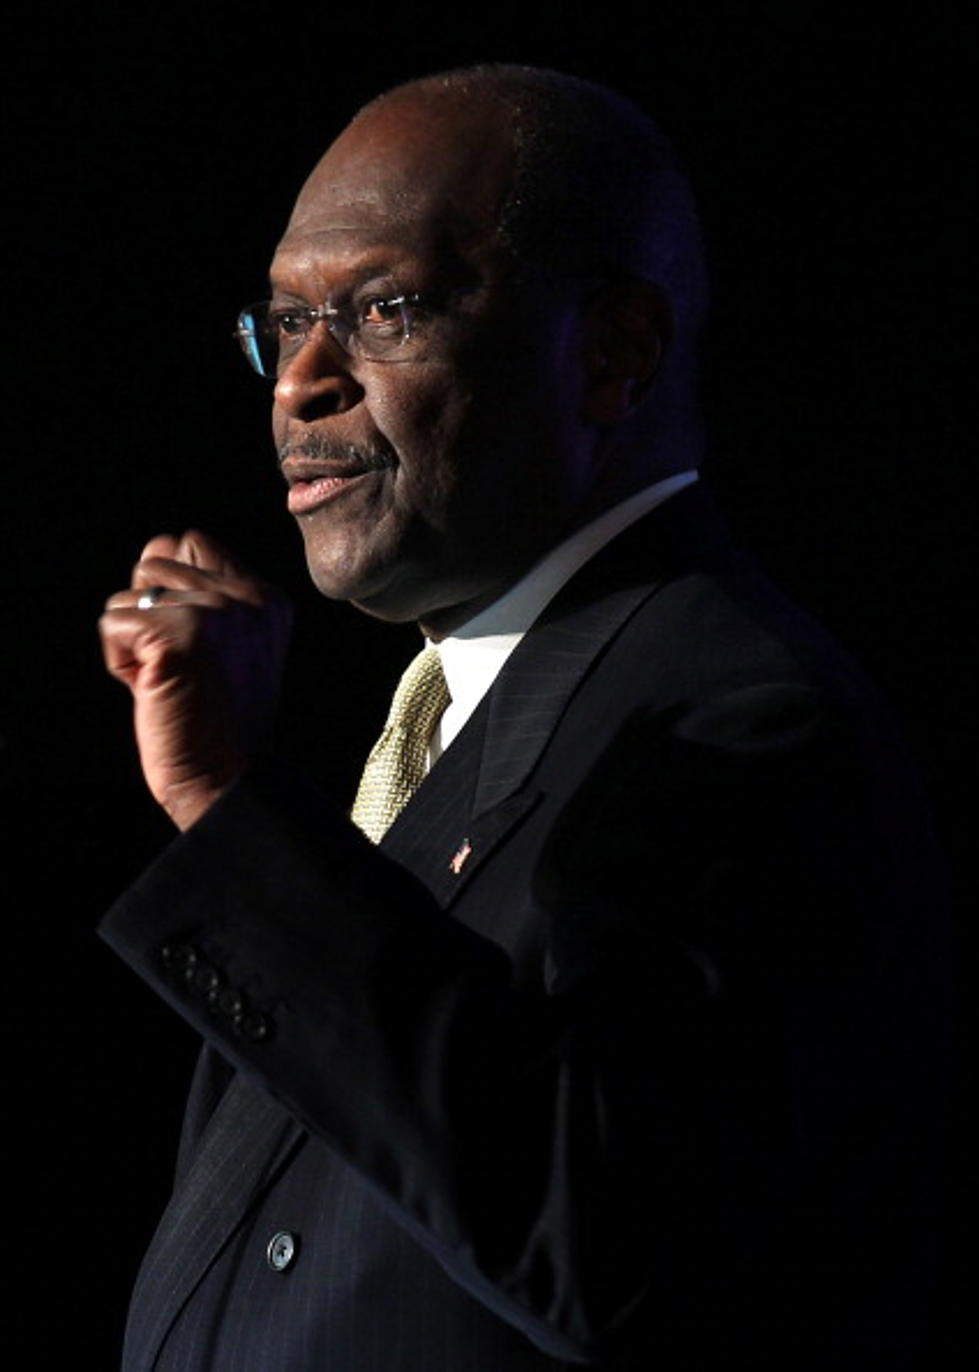 Cain Assault Continues–63 Stories in 4 Days..And Counting